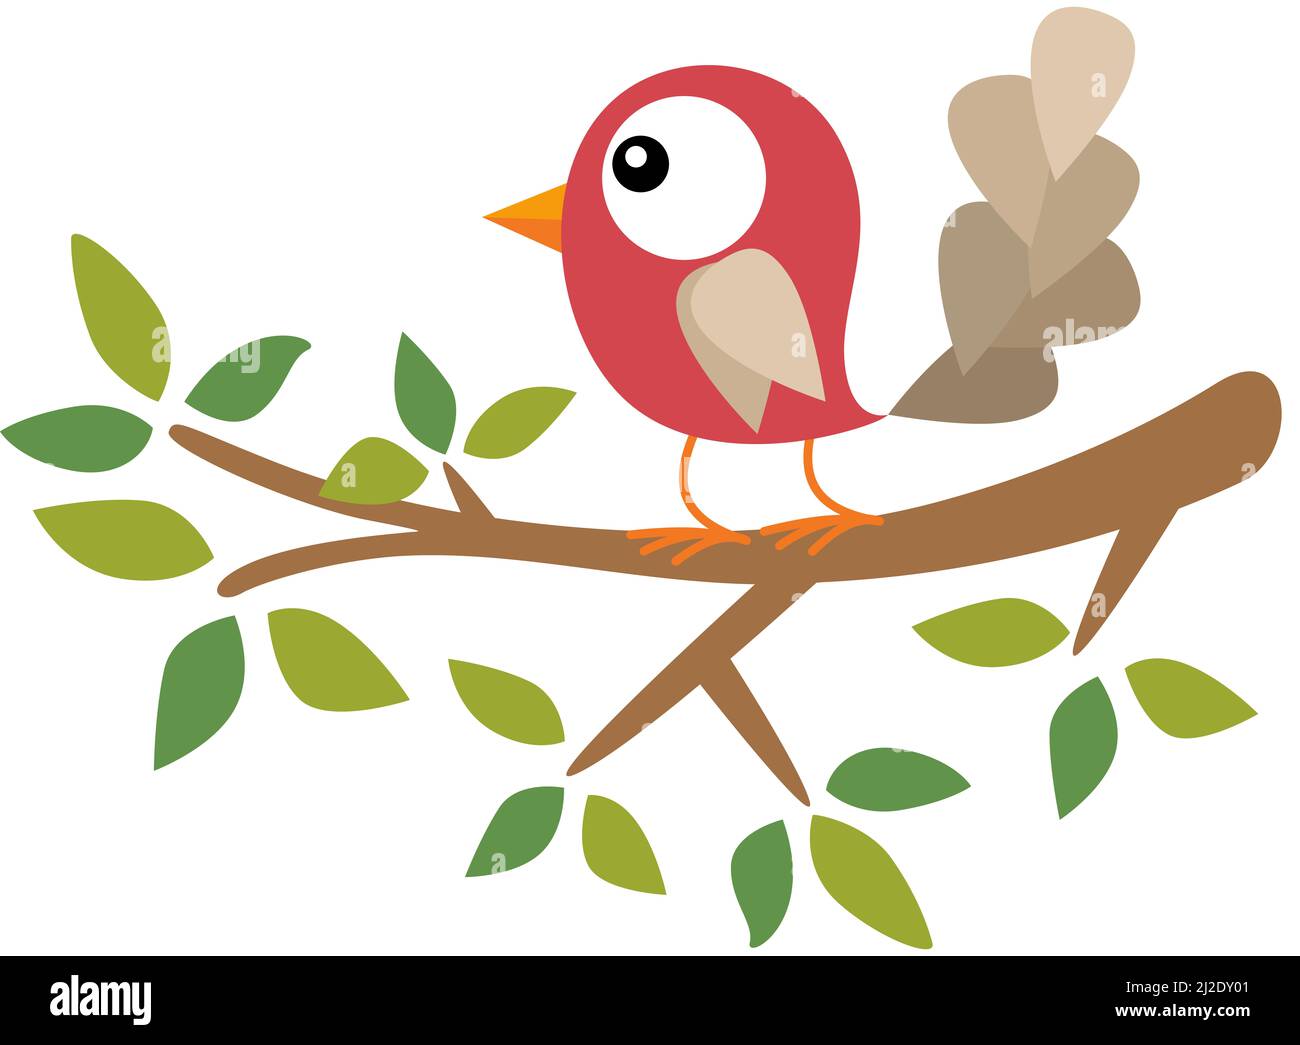 Funny little bird on branch of tree with green leaves Stock Photo - Alamy